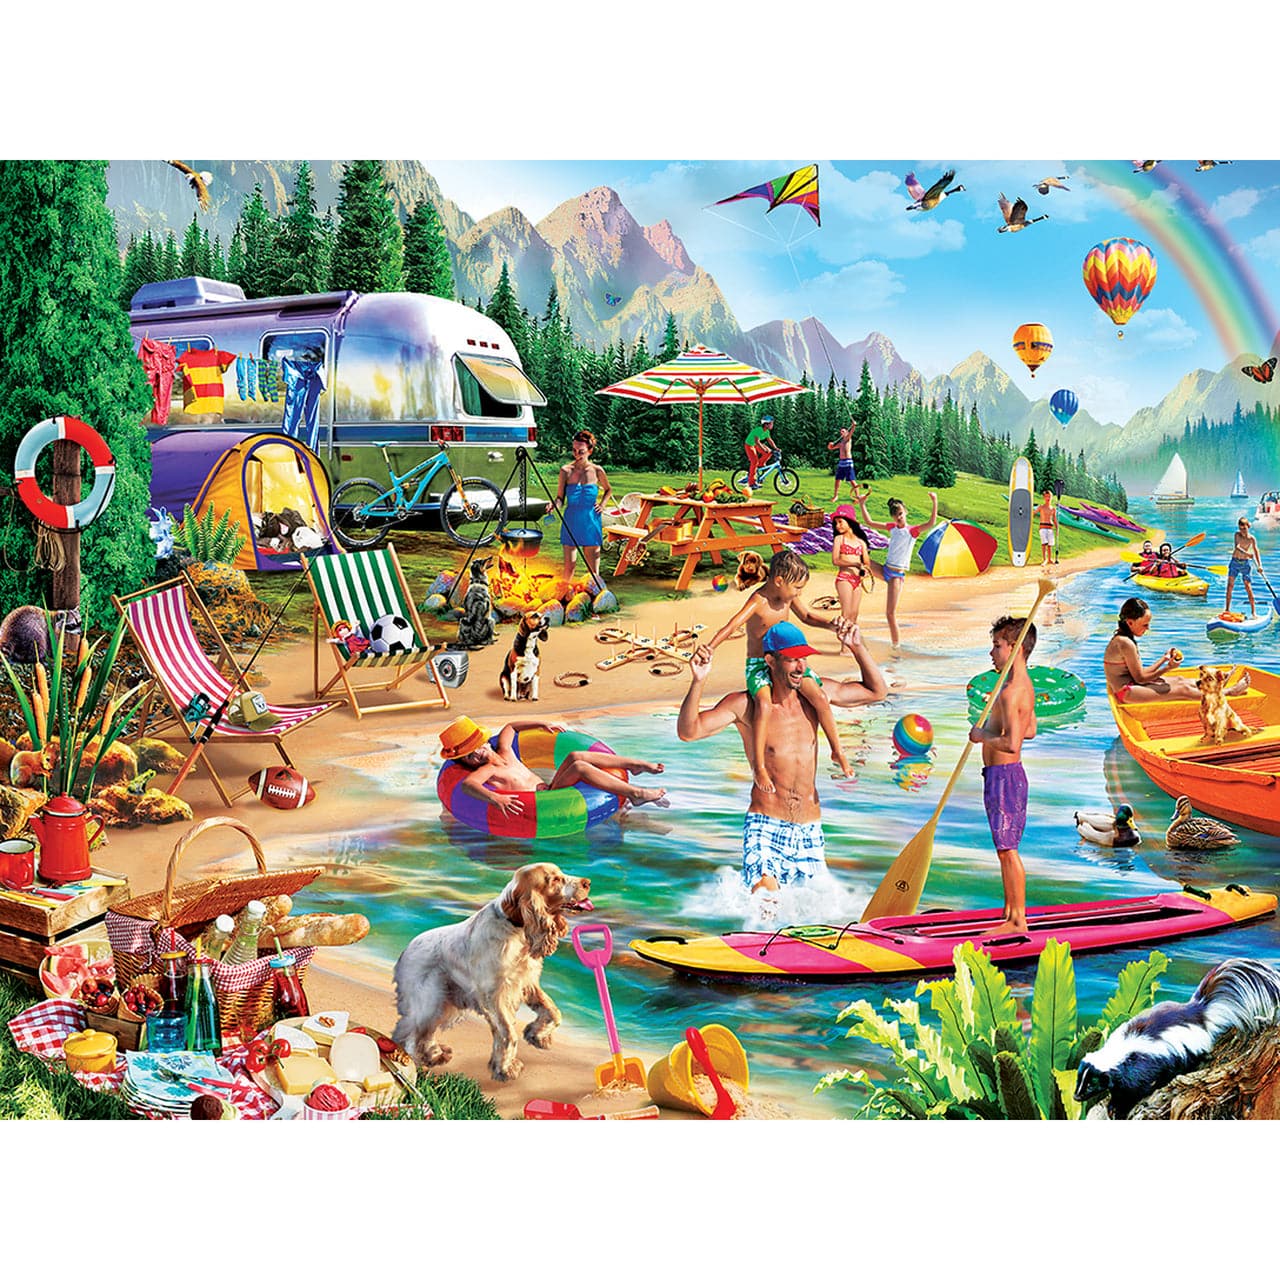 MasterPieces-Campside - Day at the Lake - 300 Piece Puzzle-31999-Legacy Toys